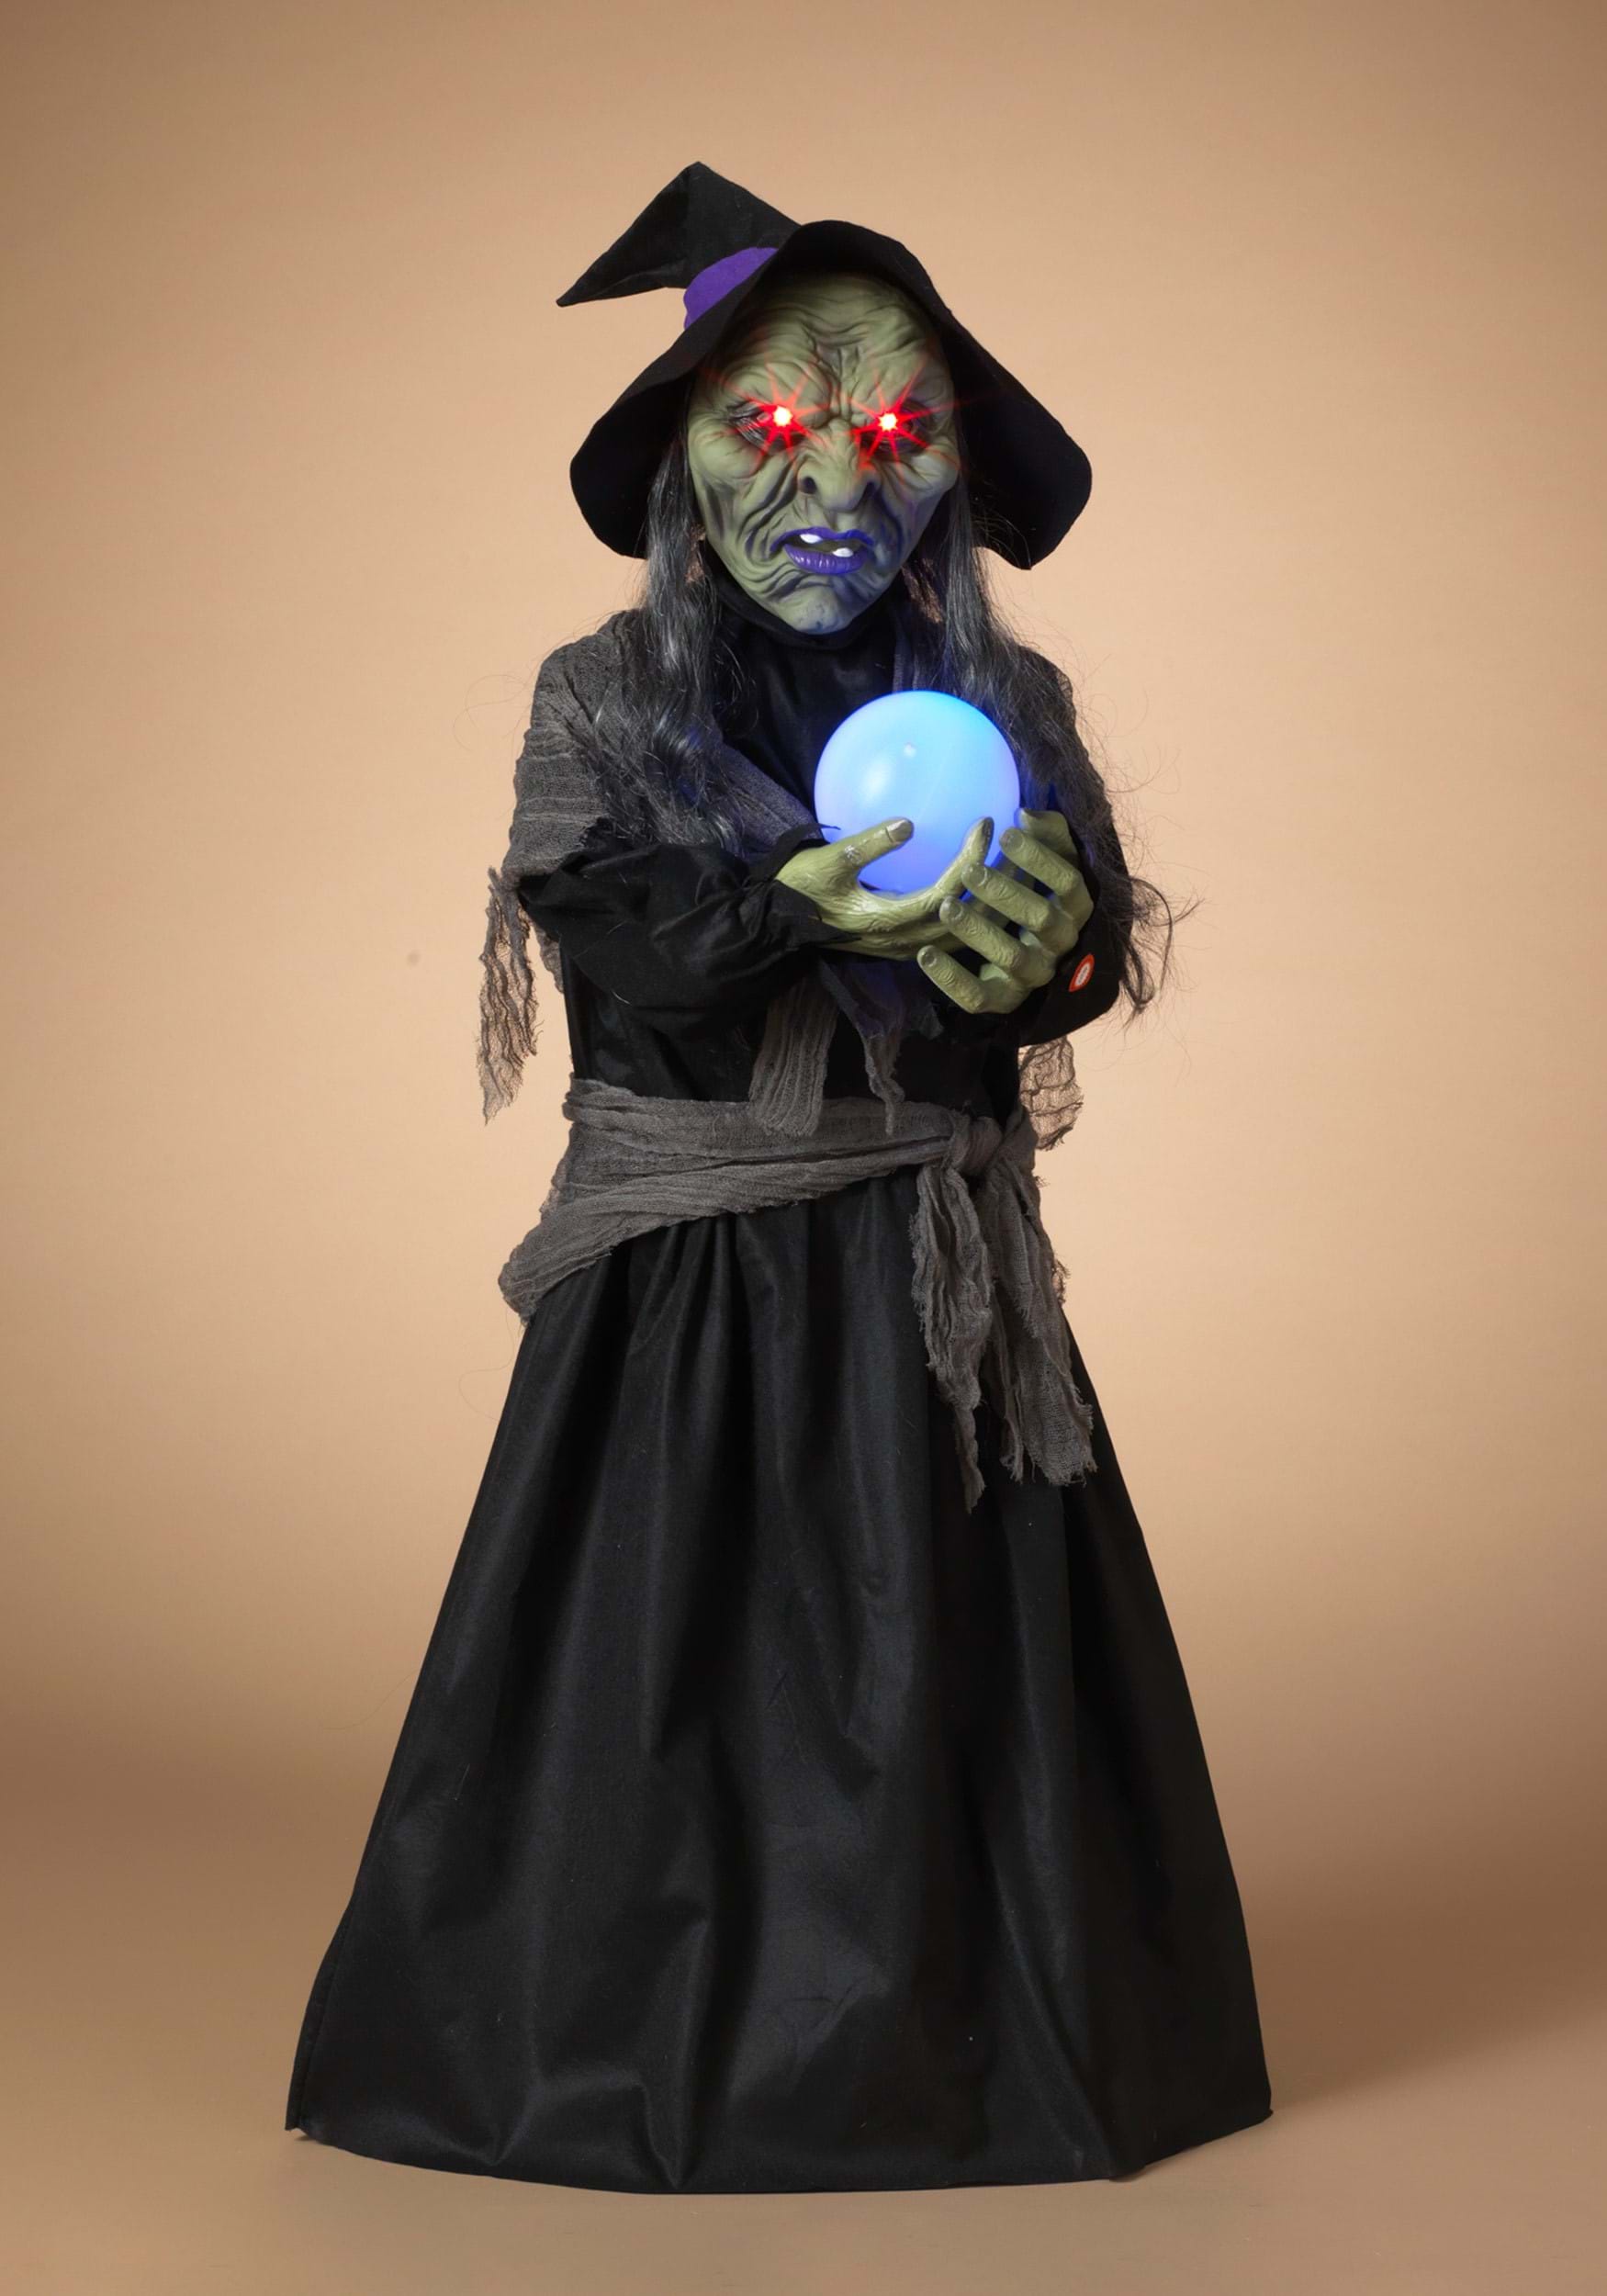 44″ Lighted Animated Witch with Sound Prop